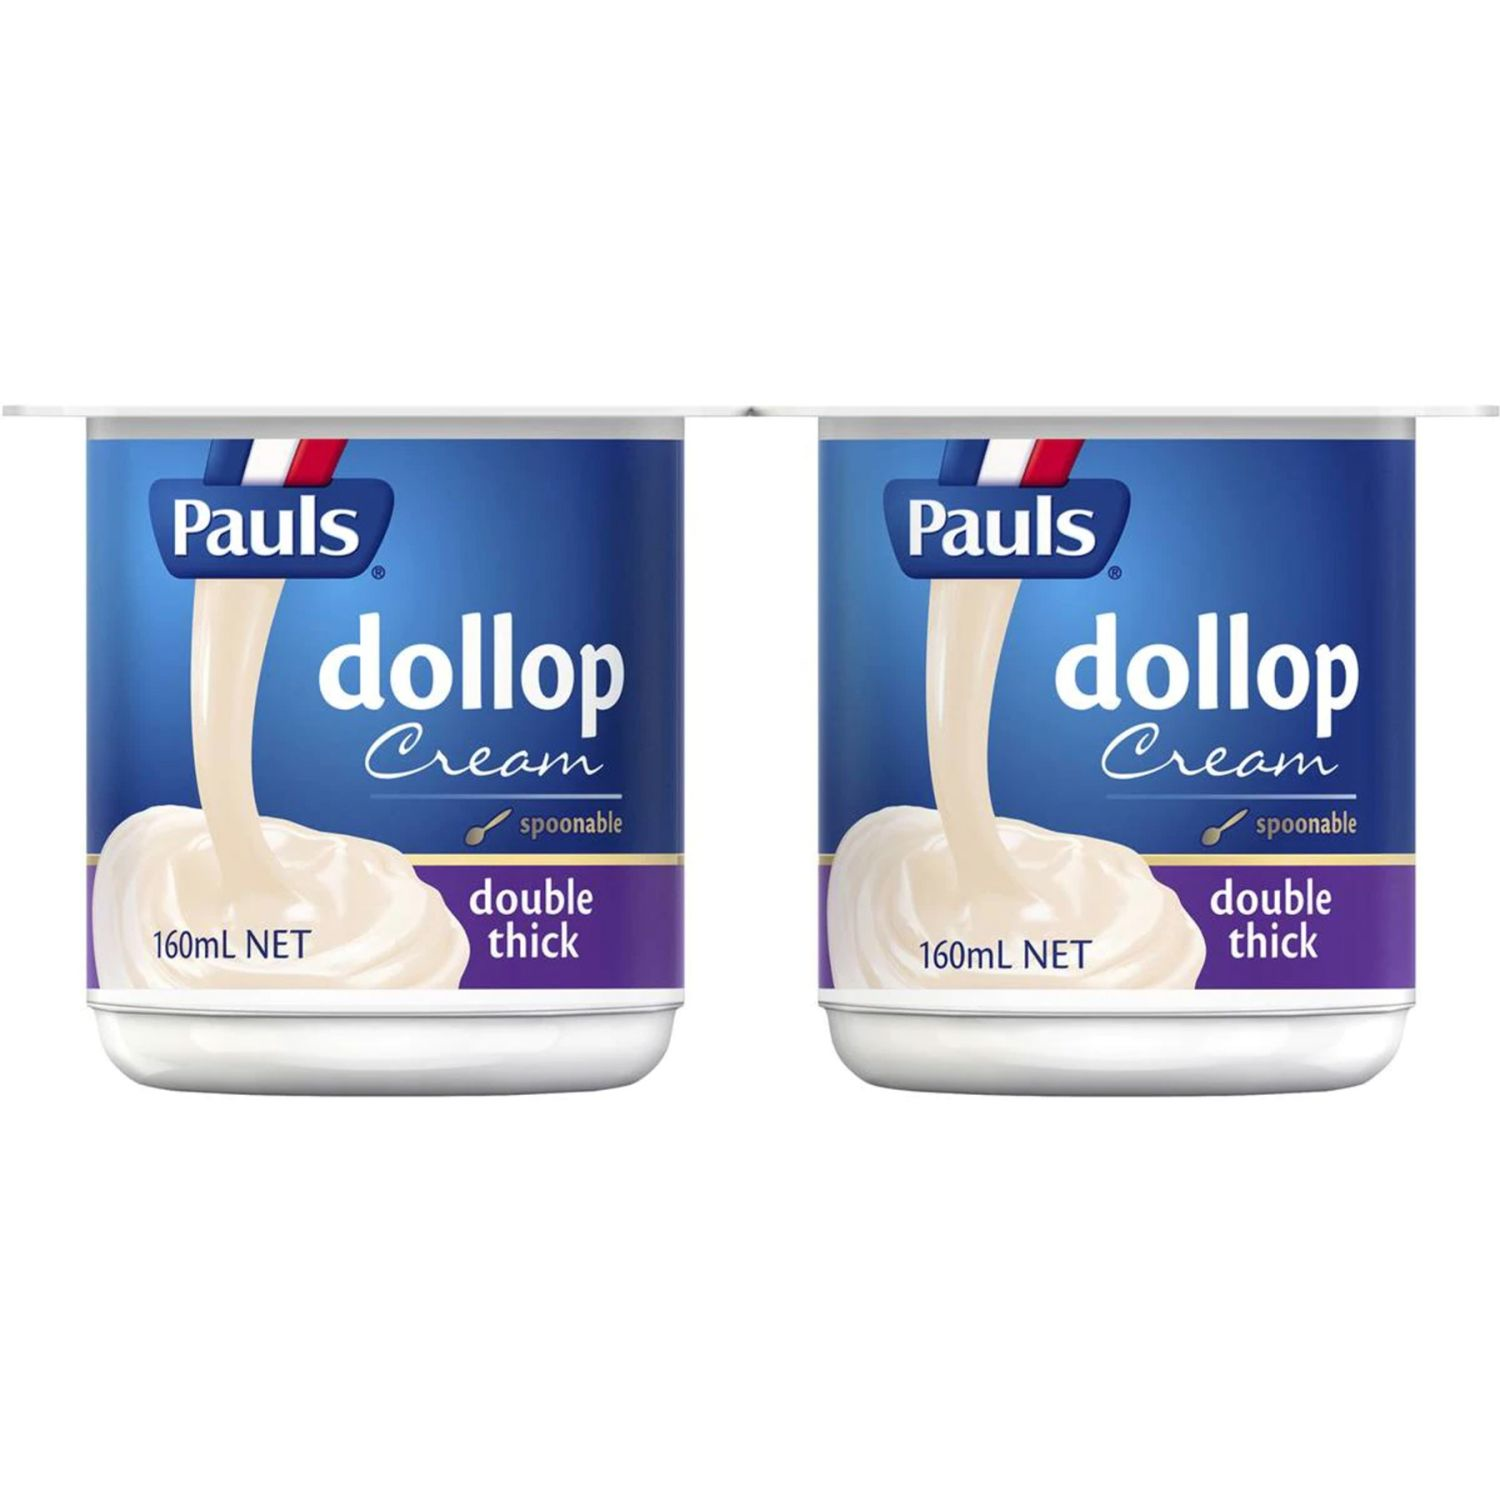 Pauls Thickened Cream Dollop, 2 Each